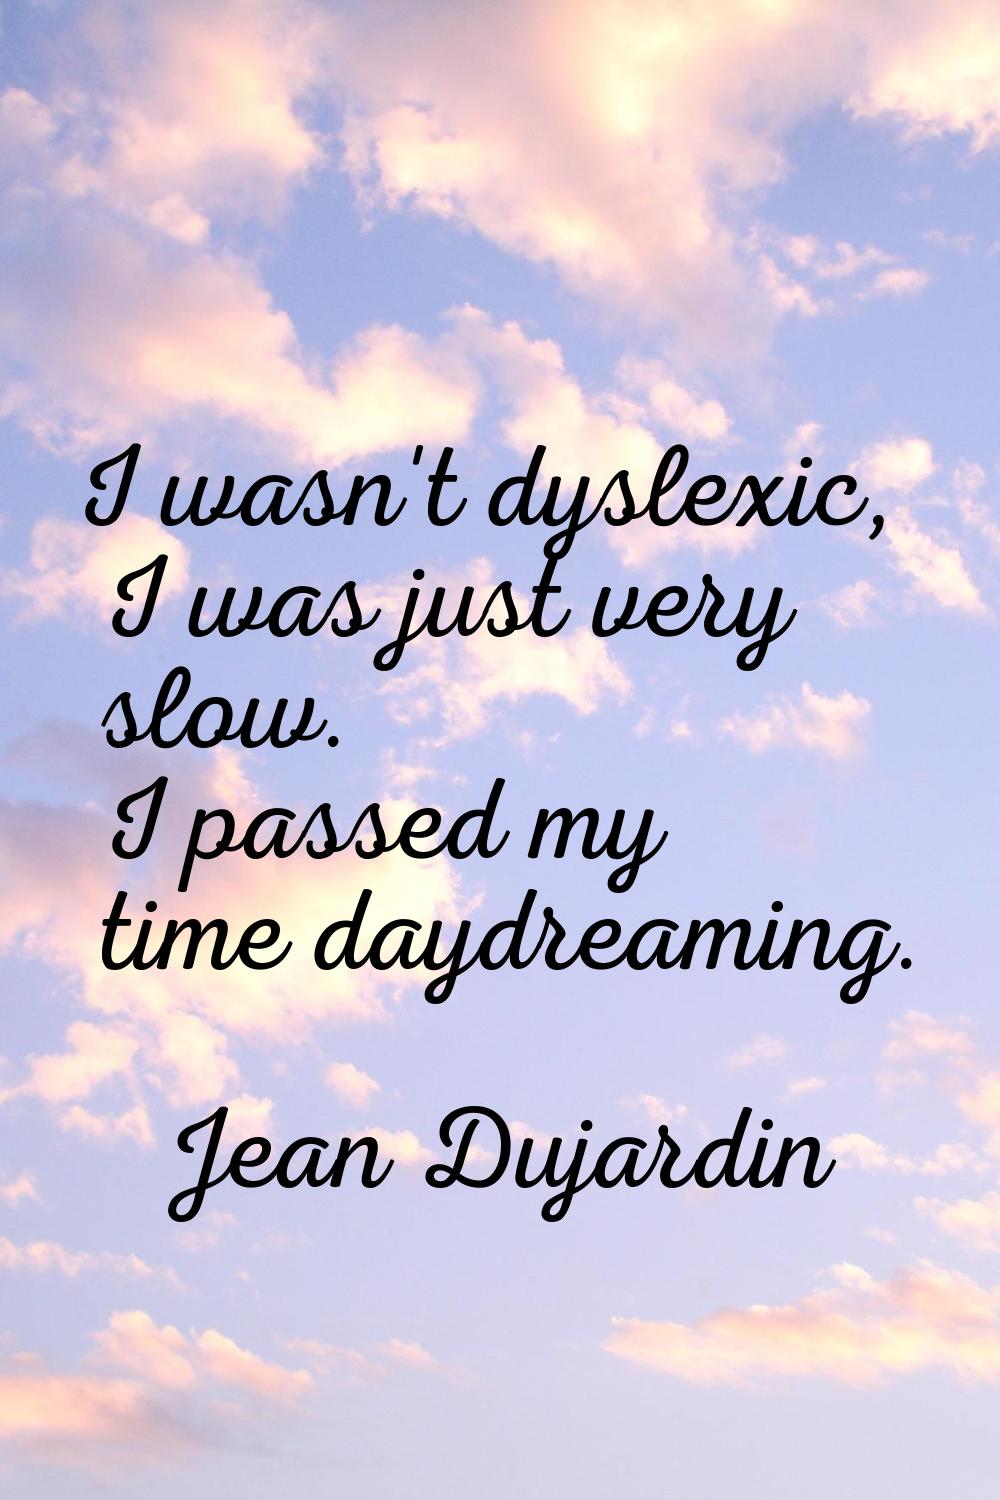 I wasn't dyslexic, I was just very slow. I passed my time daydreaming.